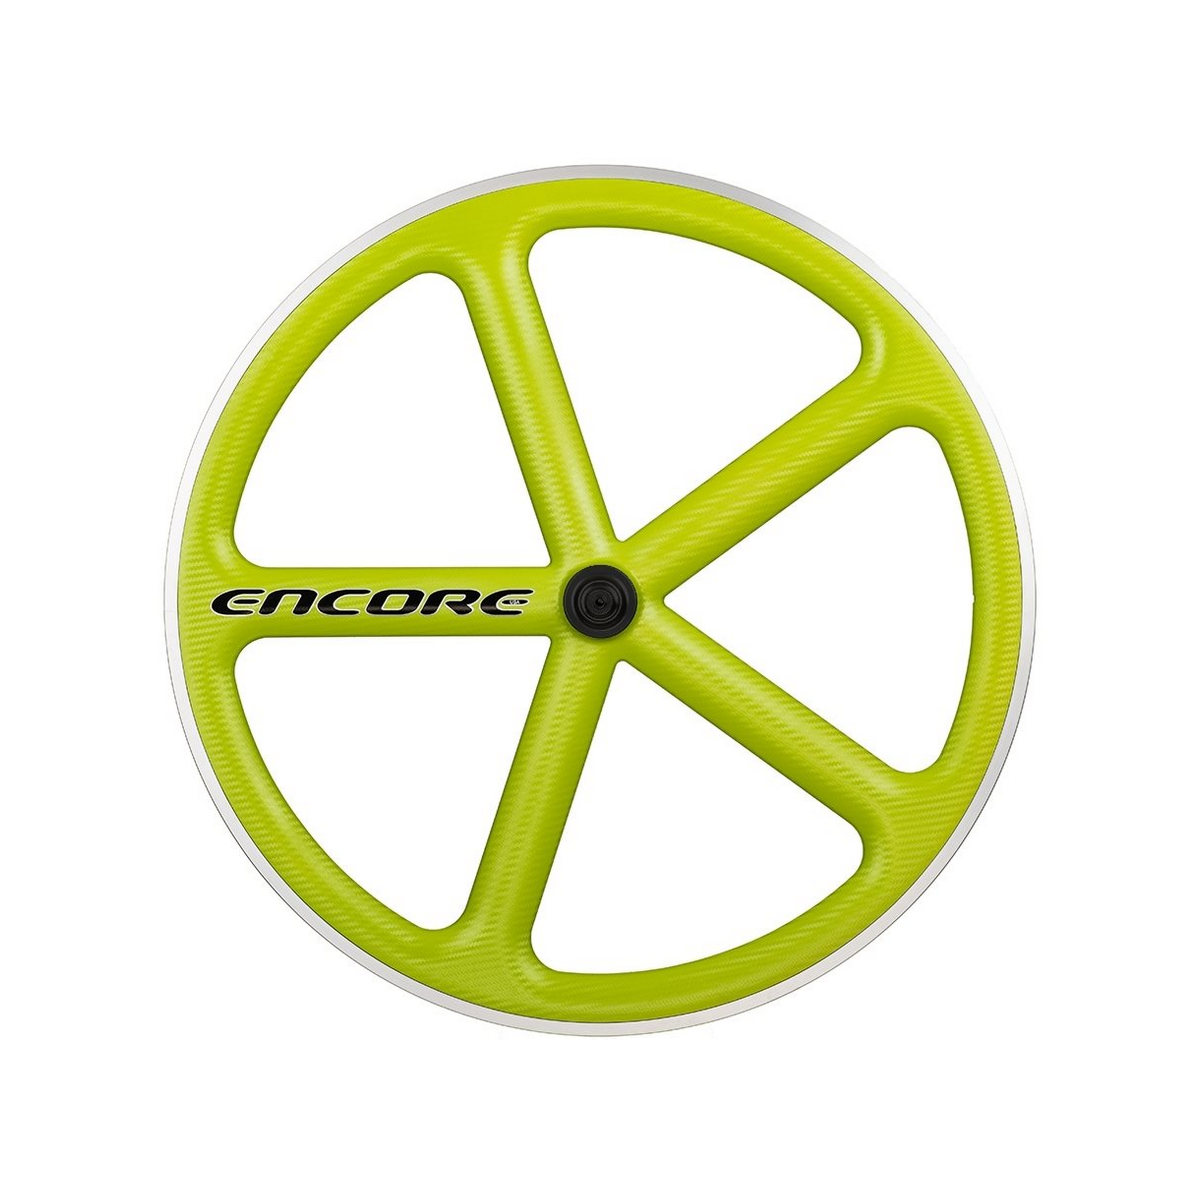 rear wheel 700c track 5 spokes carbon weave lime msw